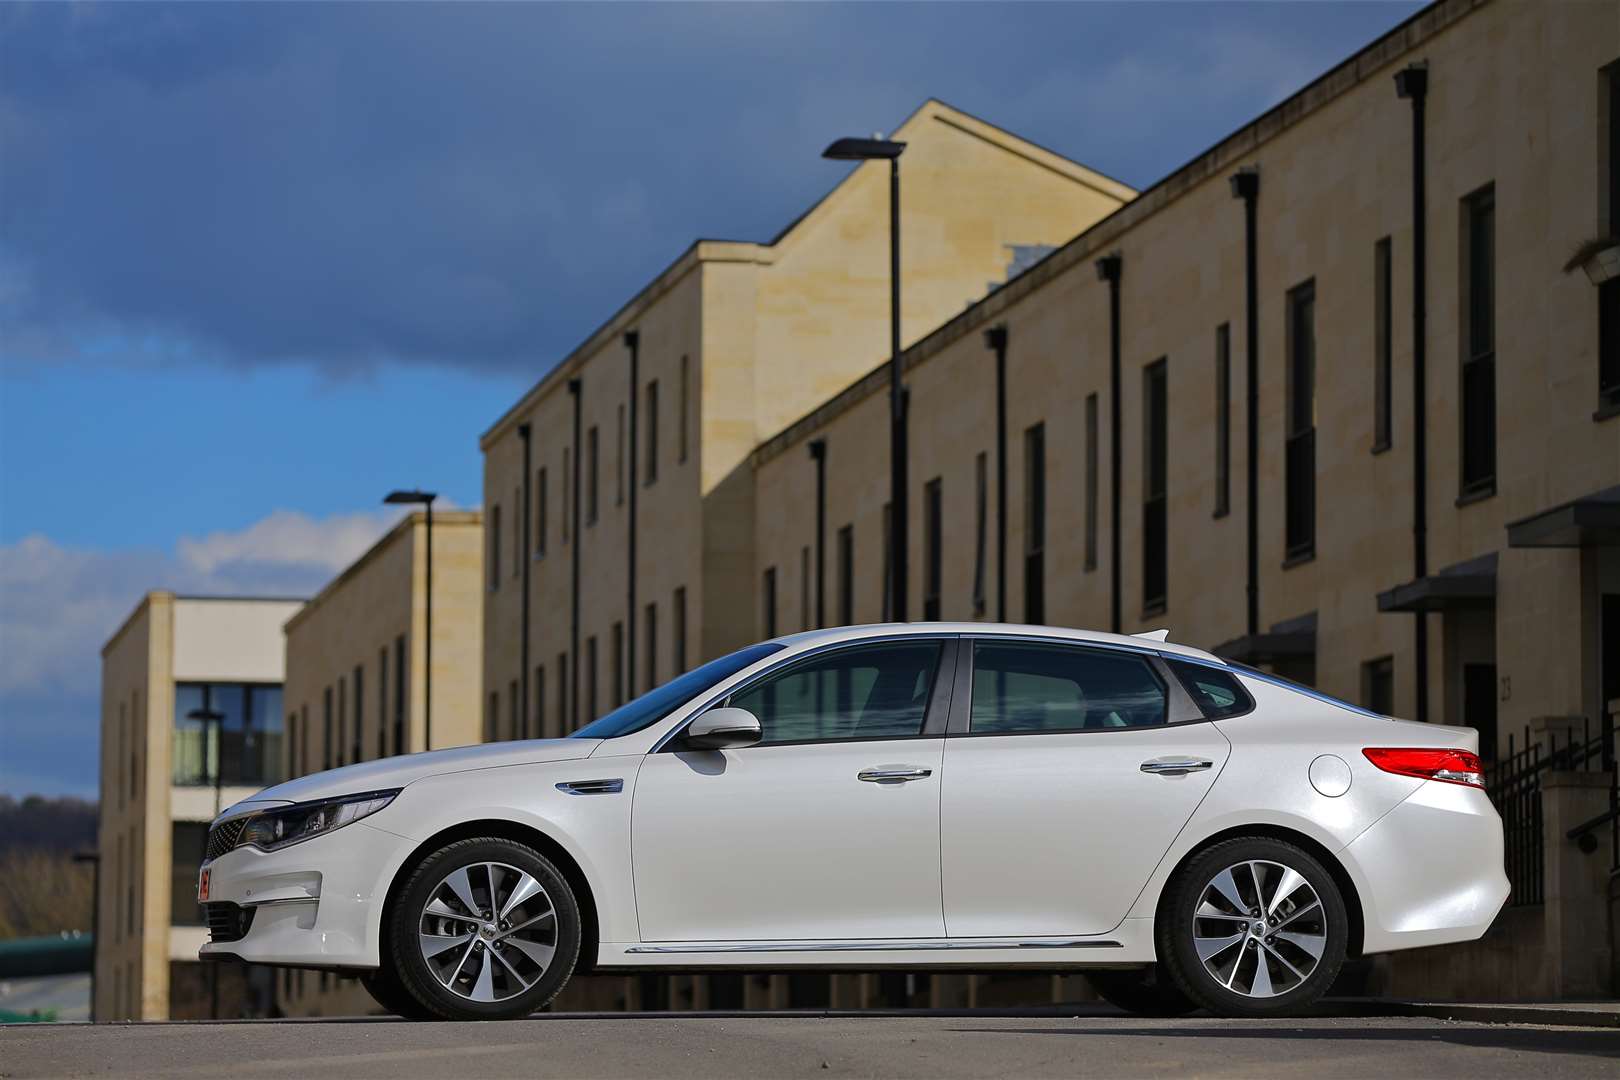 The rakish profile, high shoulder line that runs the full length of the car and narrow windows give the Optima a coupe-like profile